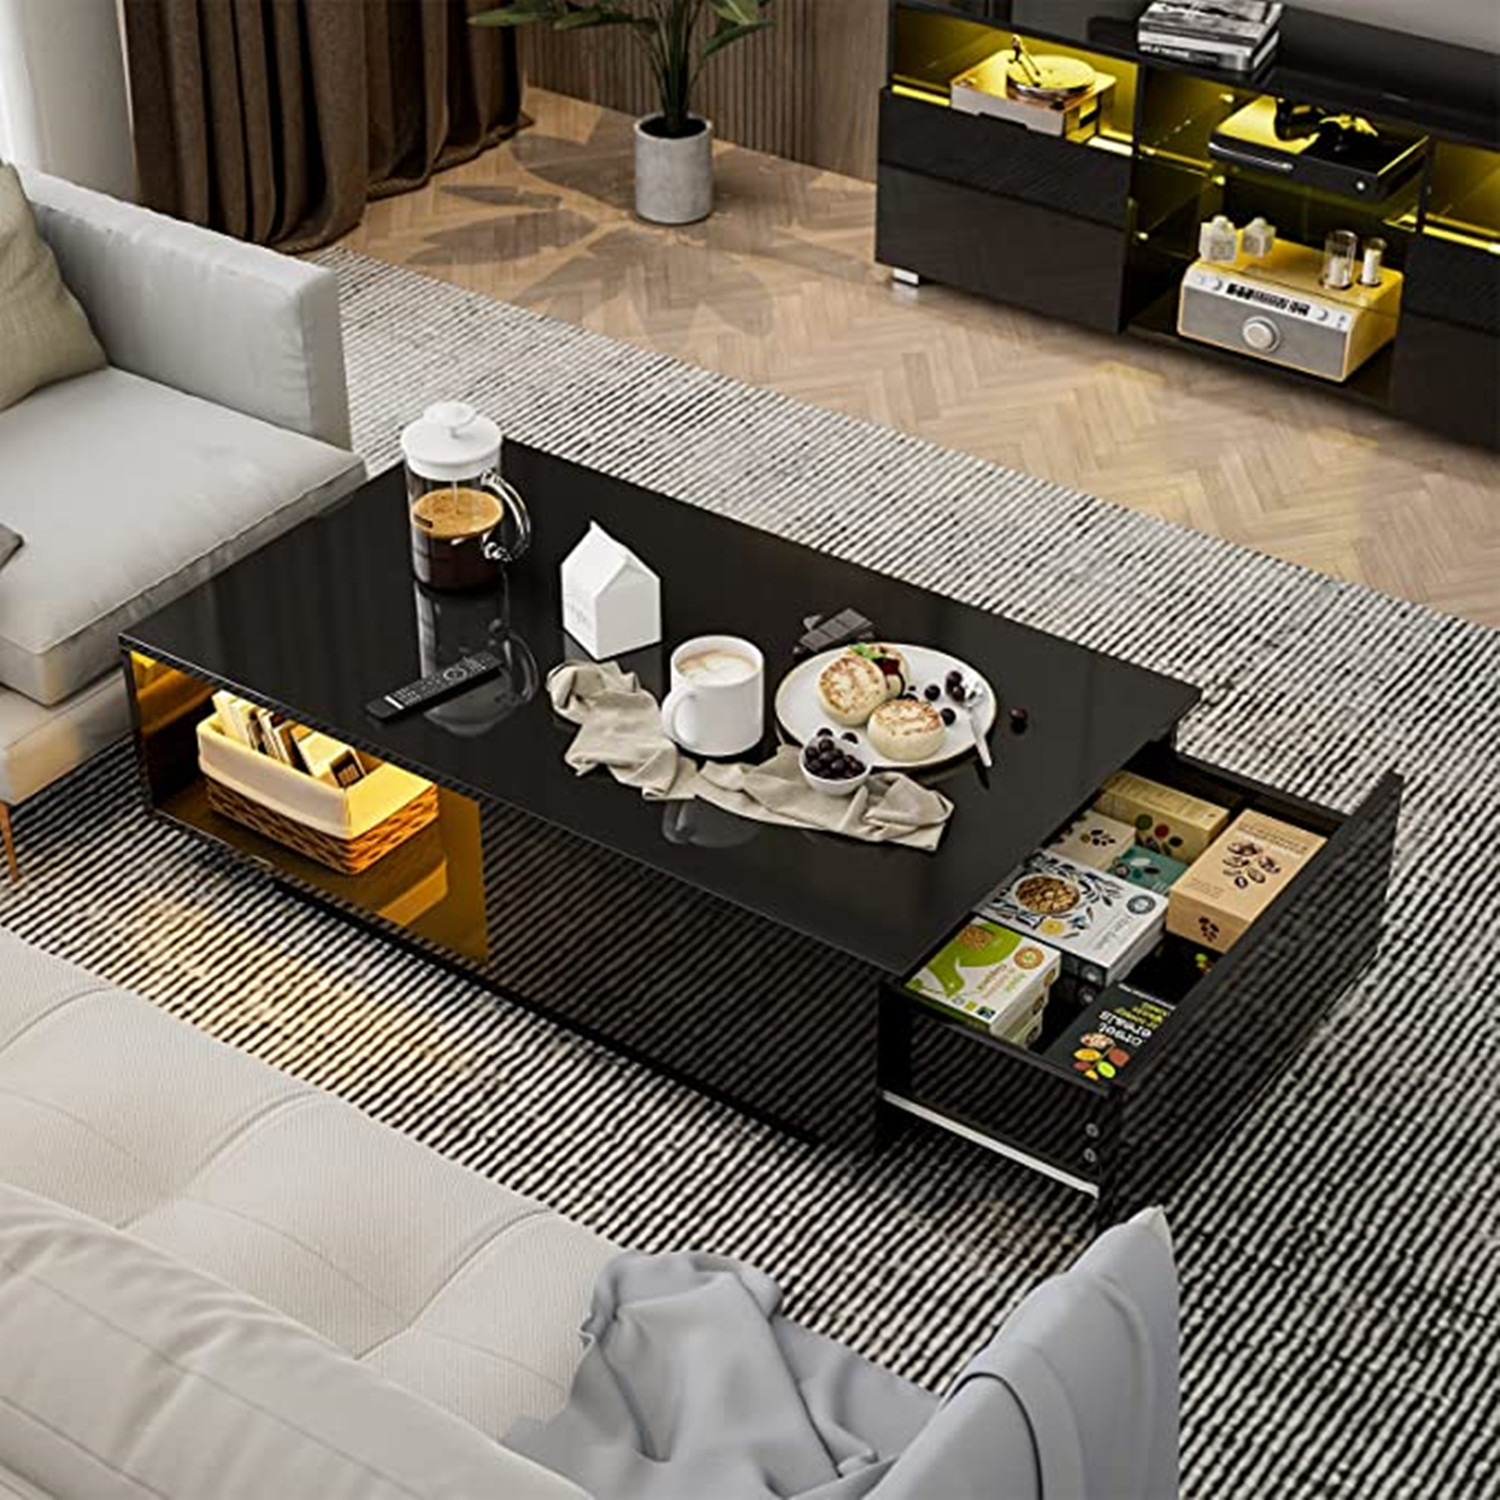 Hot Sale European Style High Glossy White Coffee Table with 1 Storage Drawers for Living Room